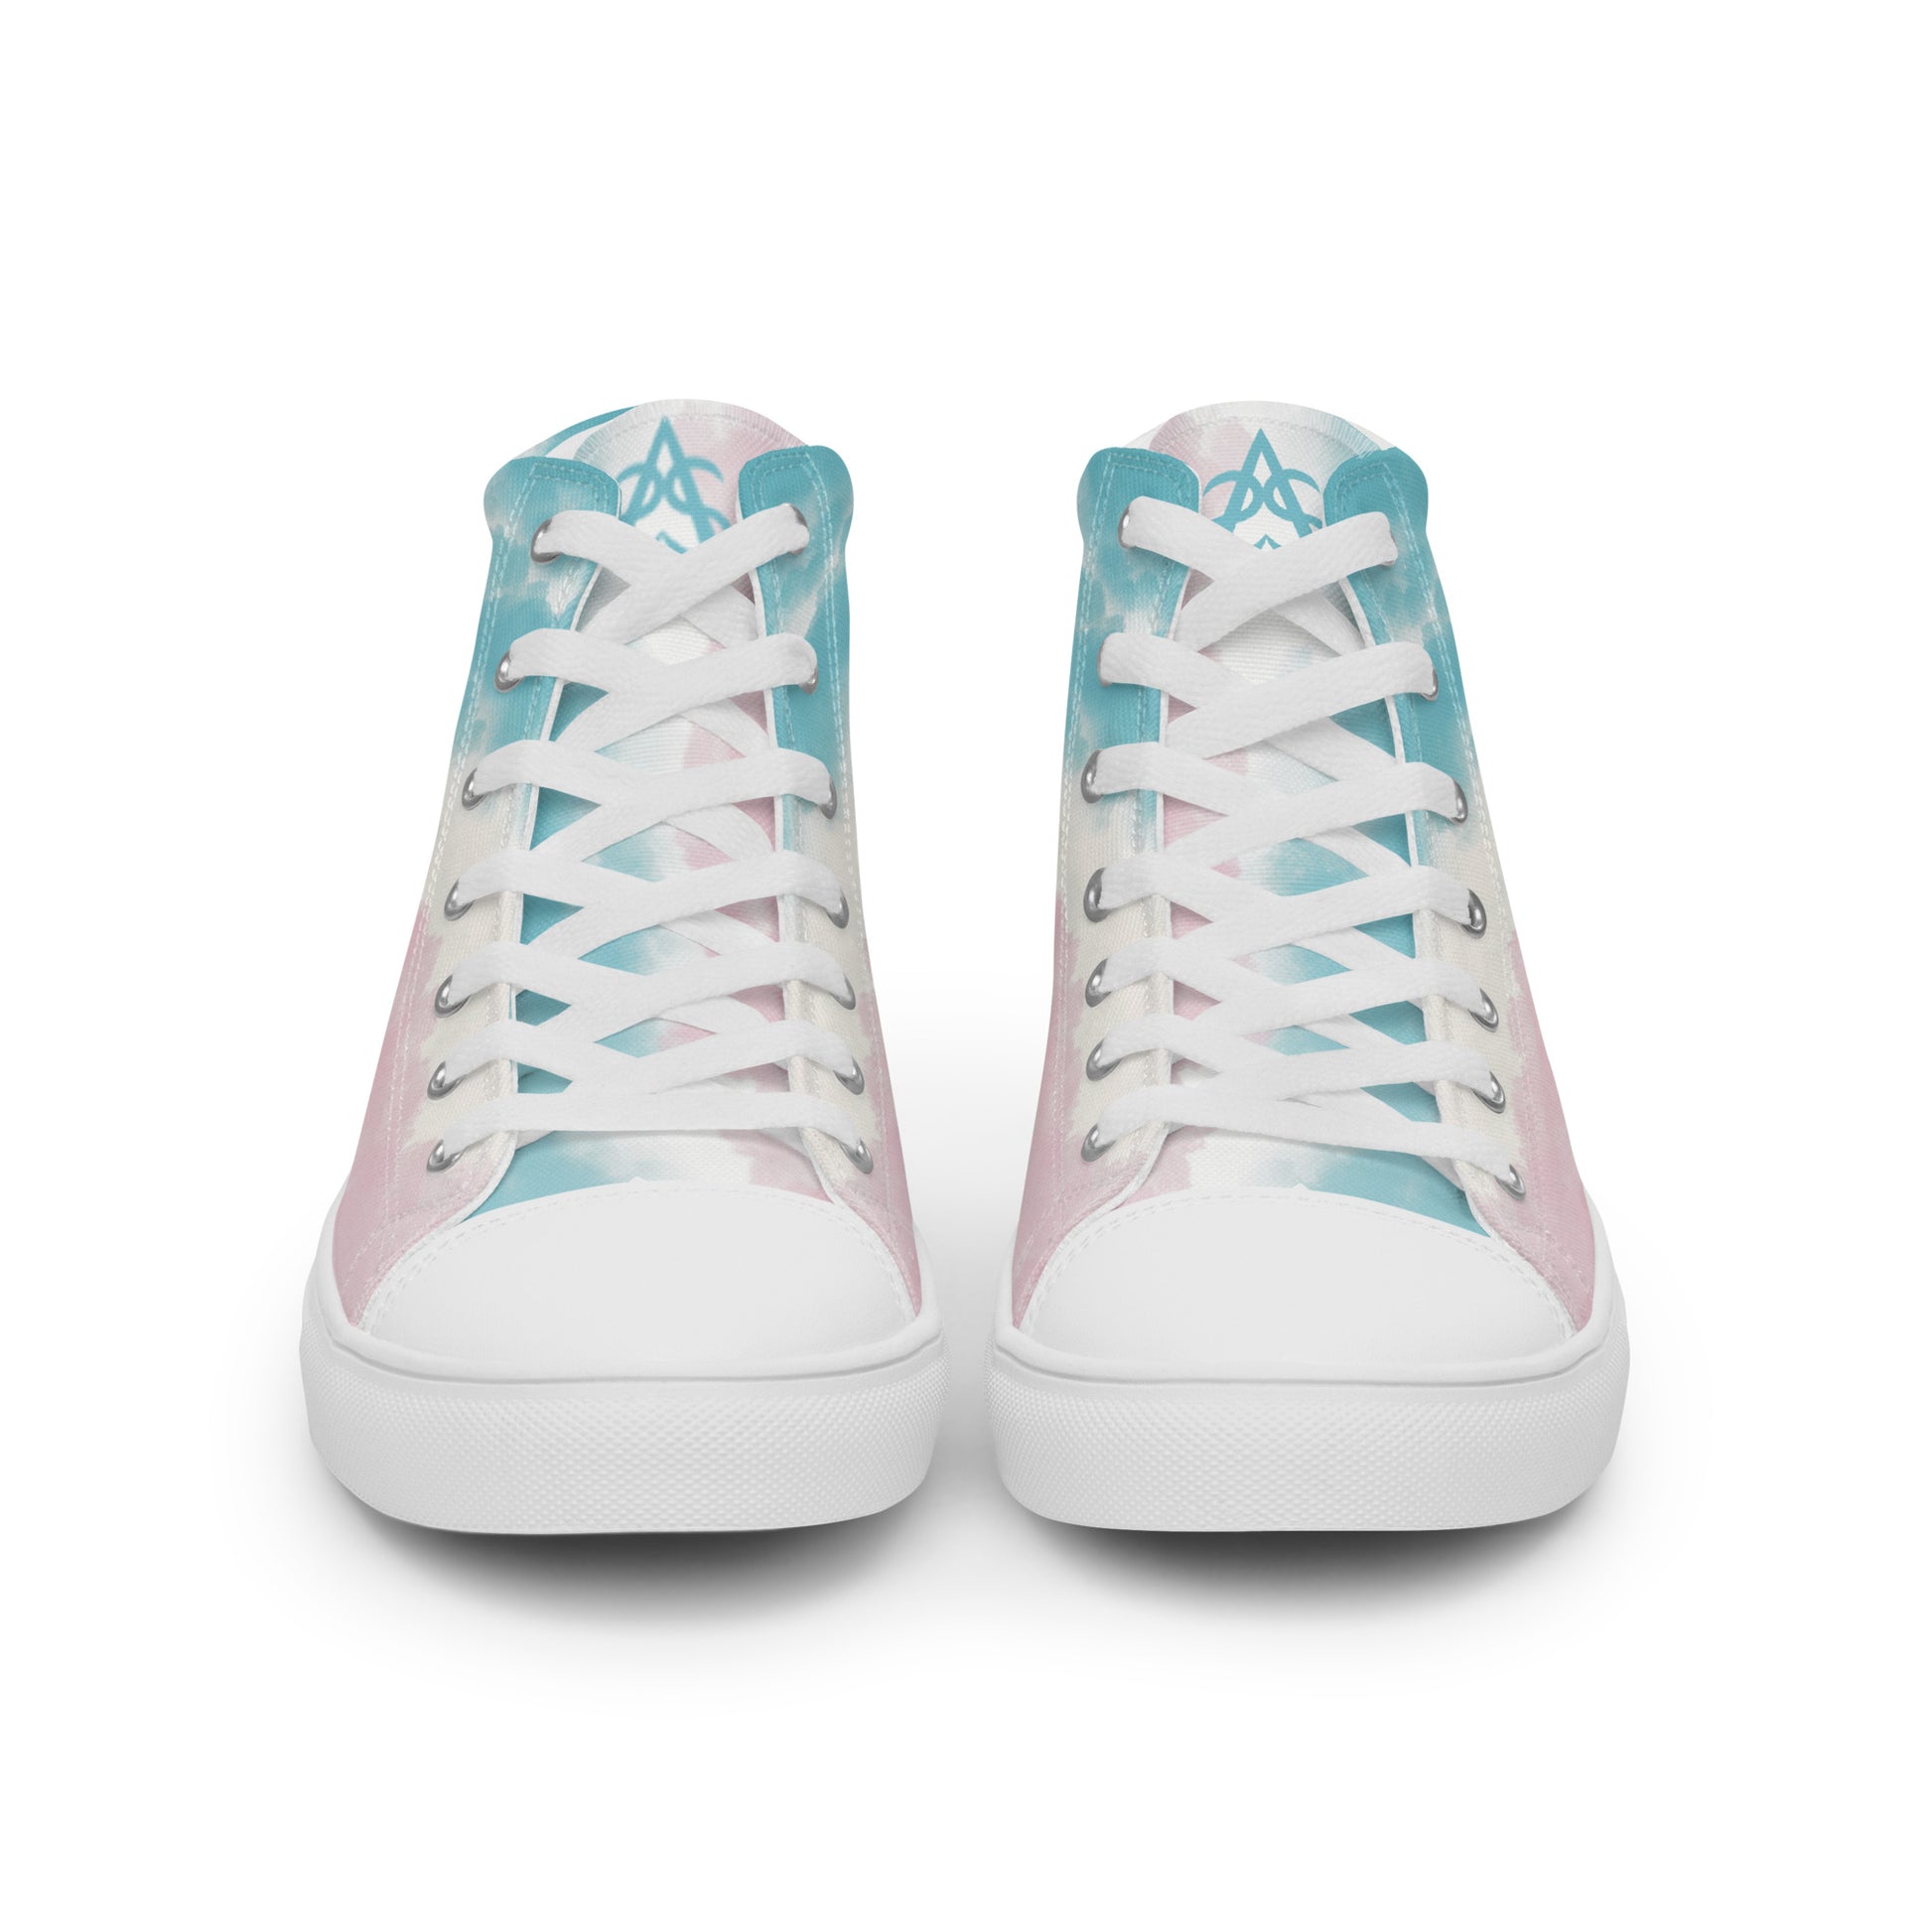 Front view: High top shoes with a cloudy design in blue, white, and pink has a doodle style heart on the heel, white shoe laces, and white details.